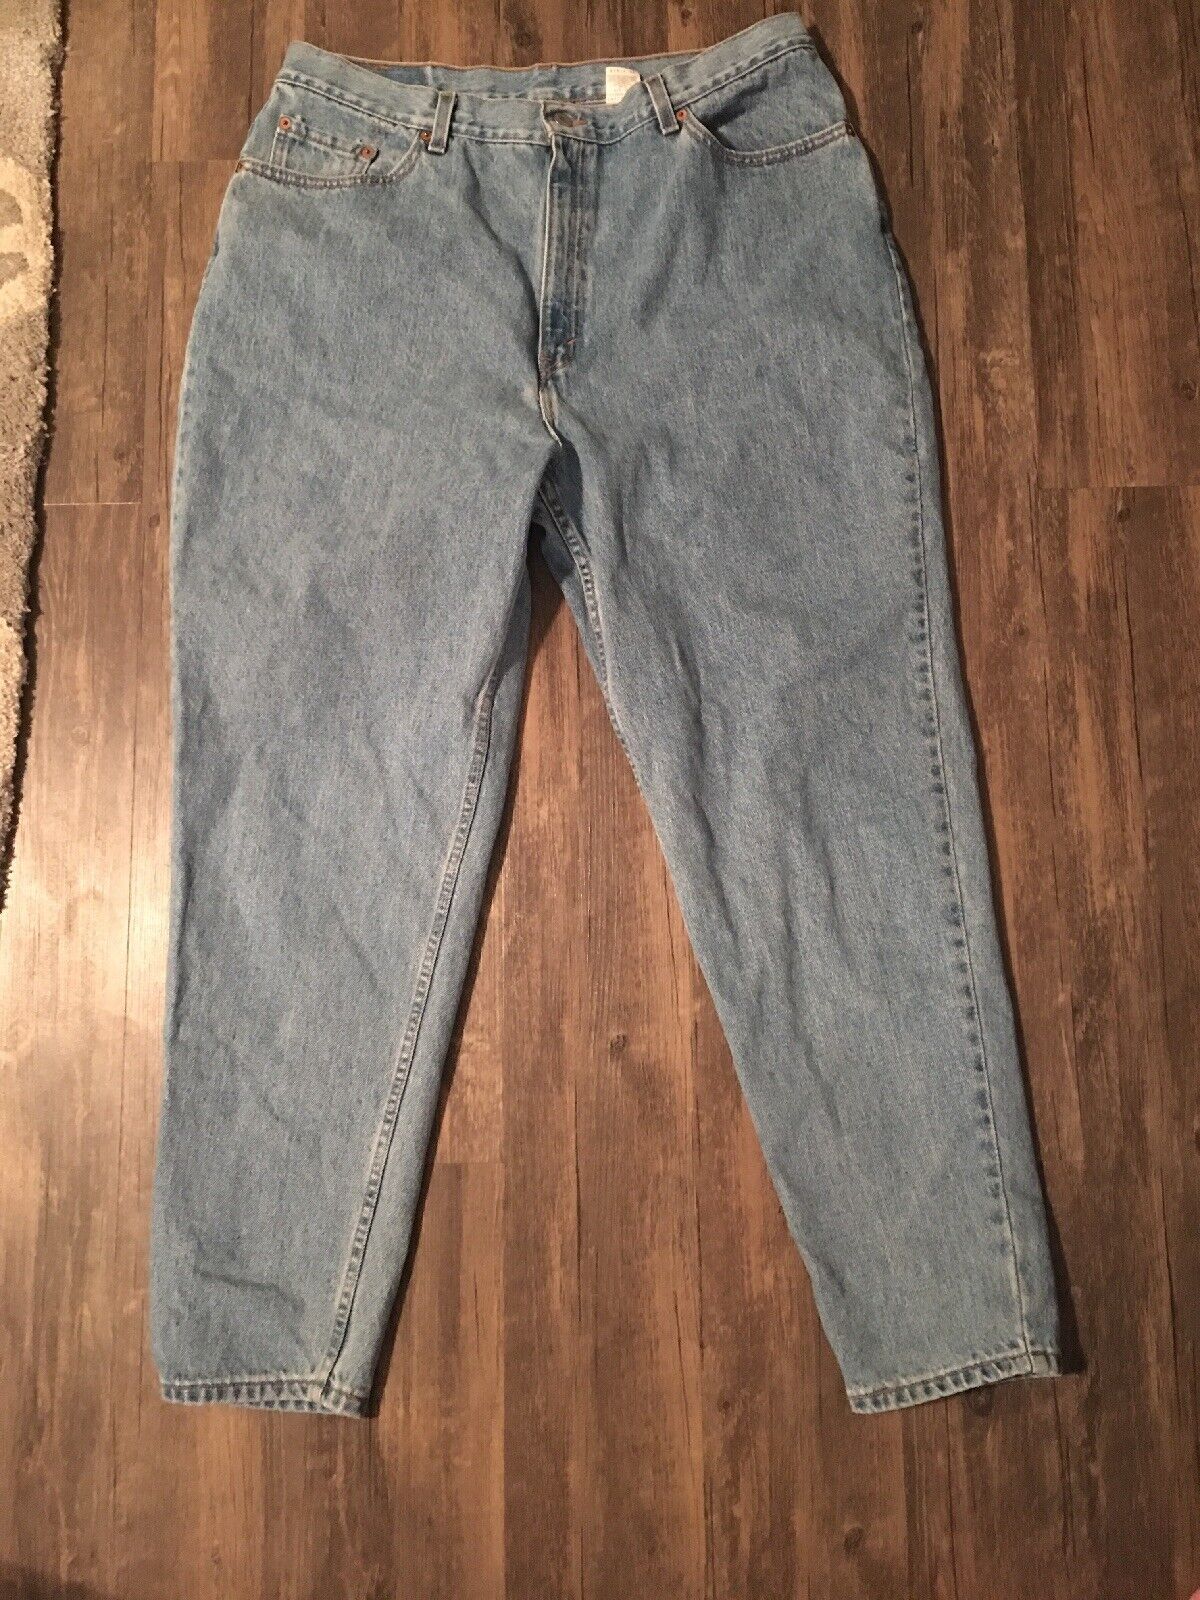 Vintage Levis Mom Jeans Ranking TOP3 550 USA Size H Relaxed New item Tapered Leg M 20W